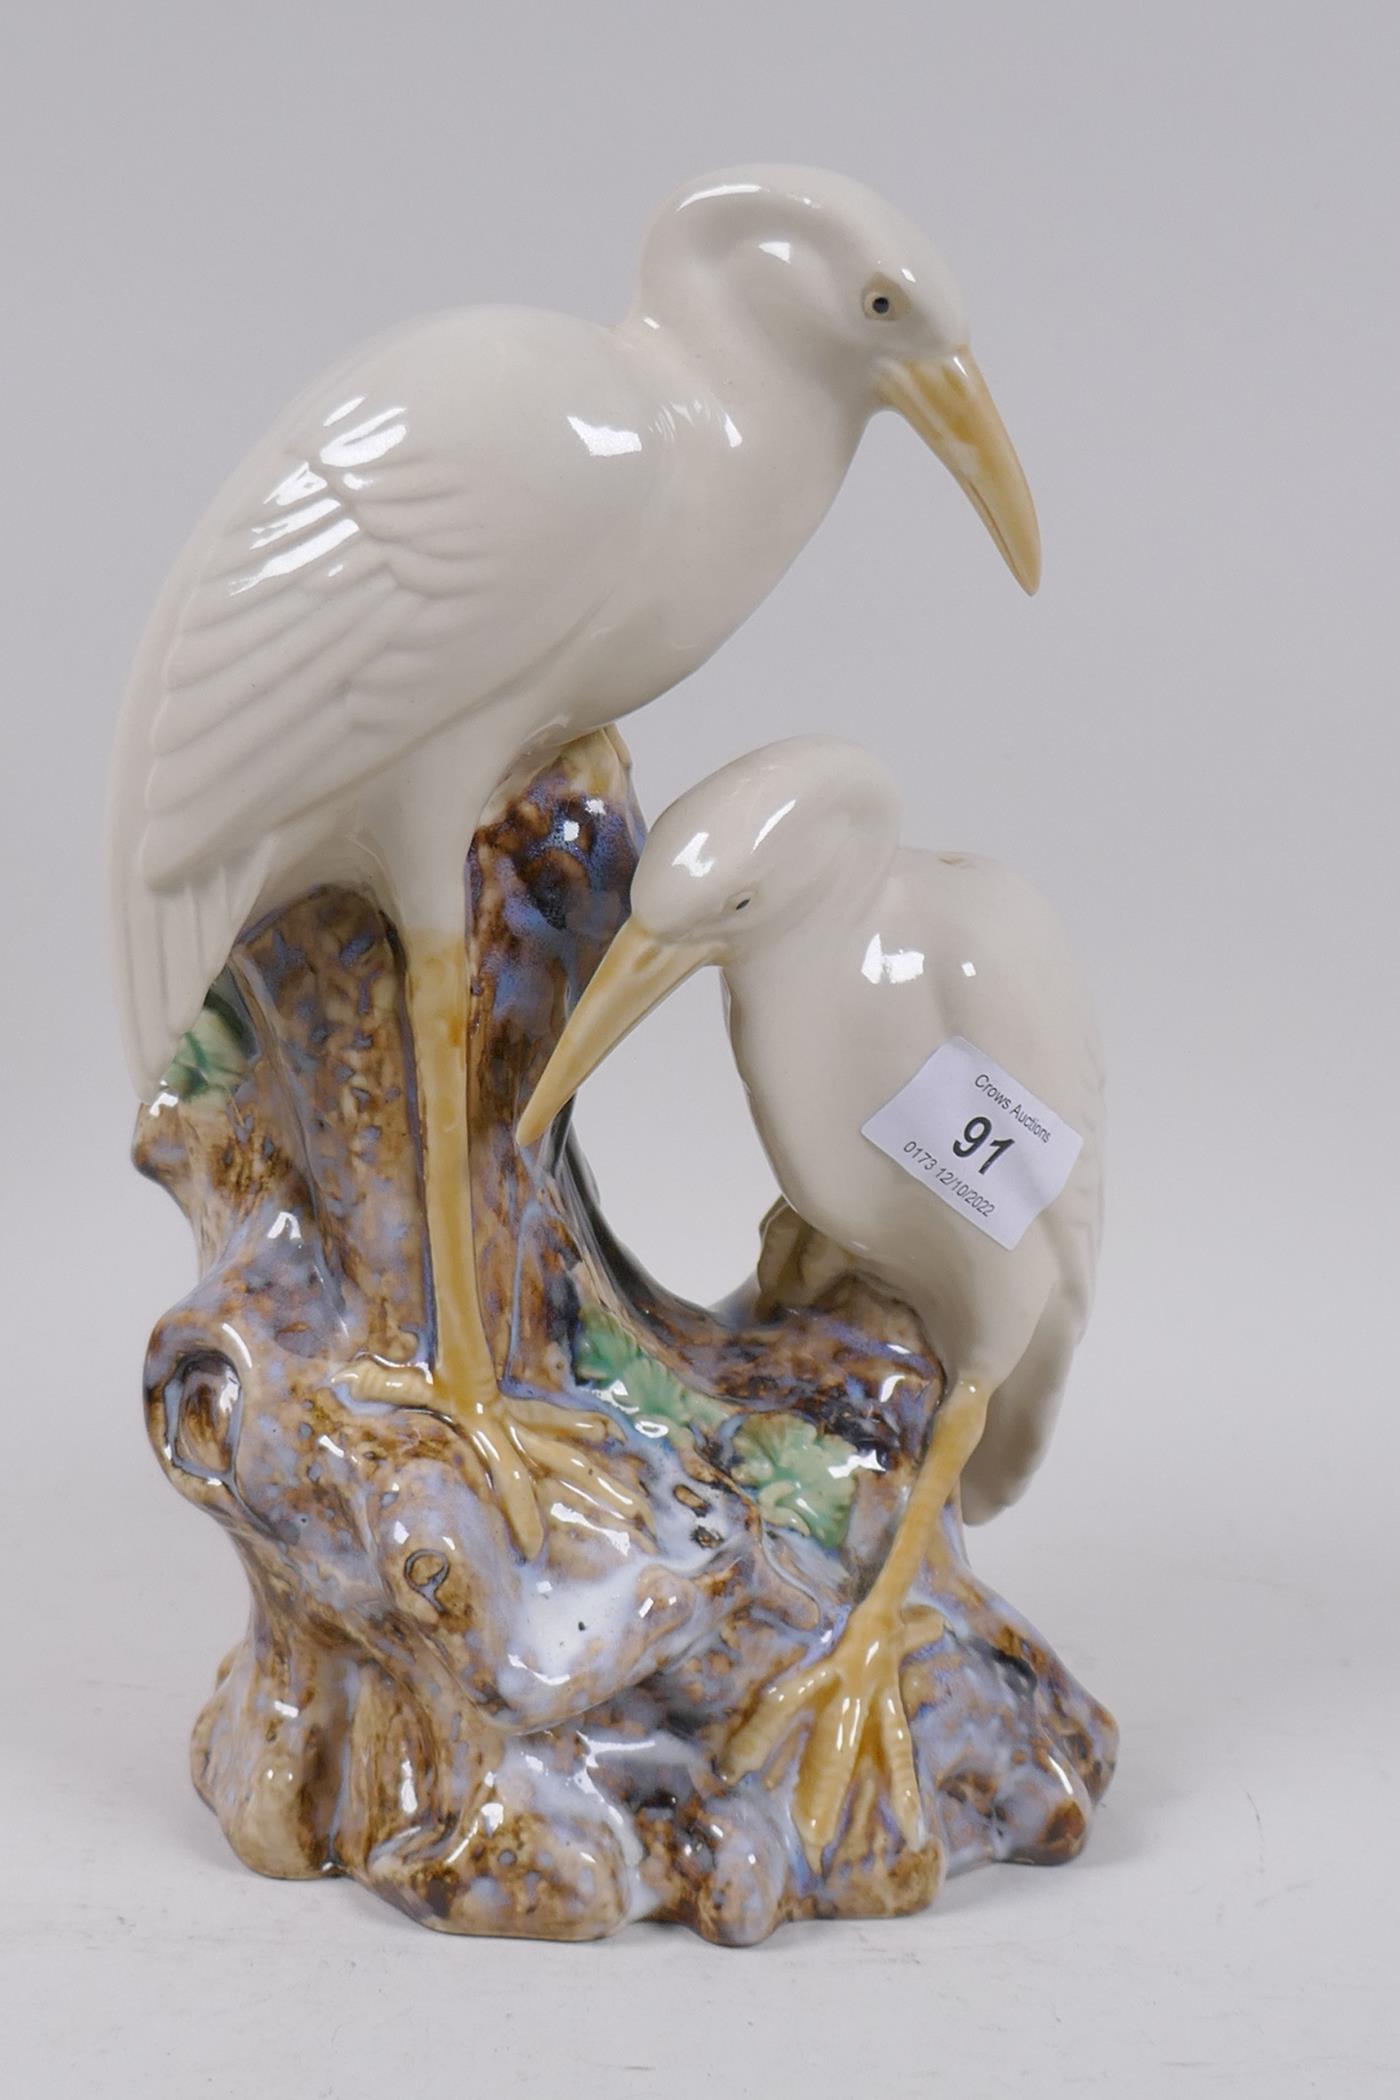 A majolica spill vase in the form of two cranes, 26cm high